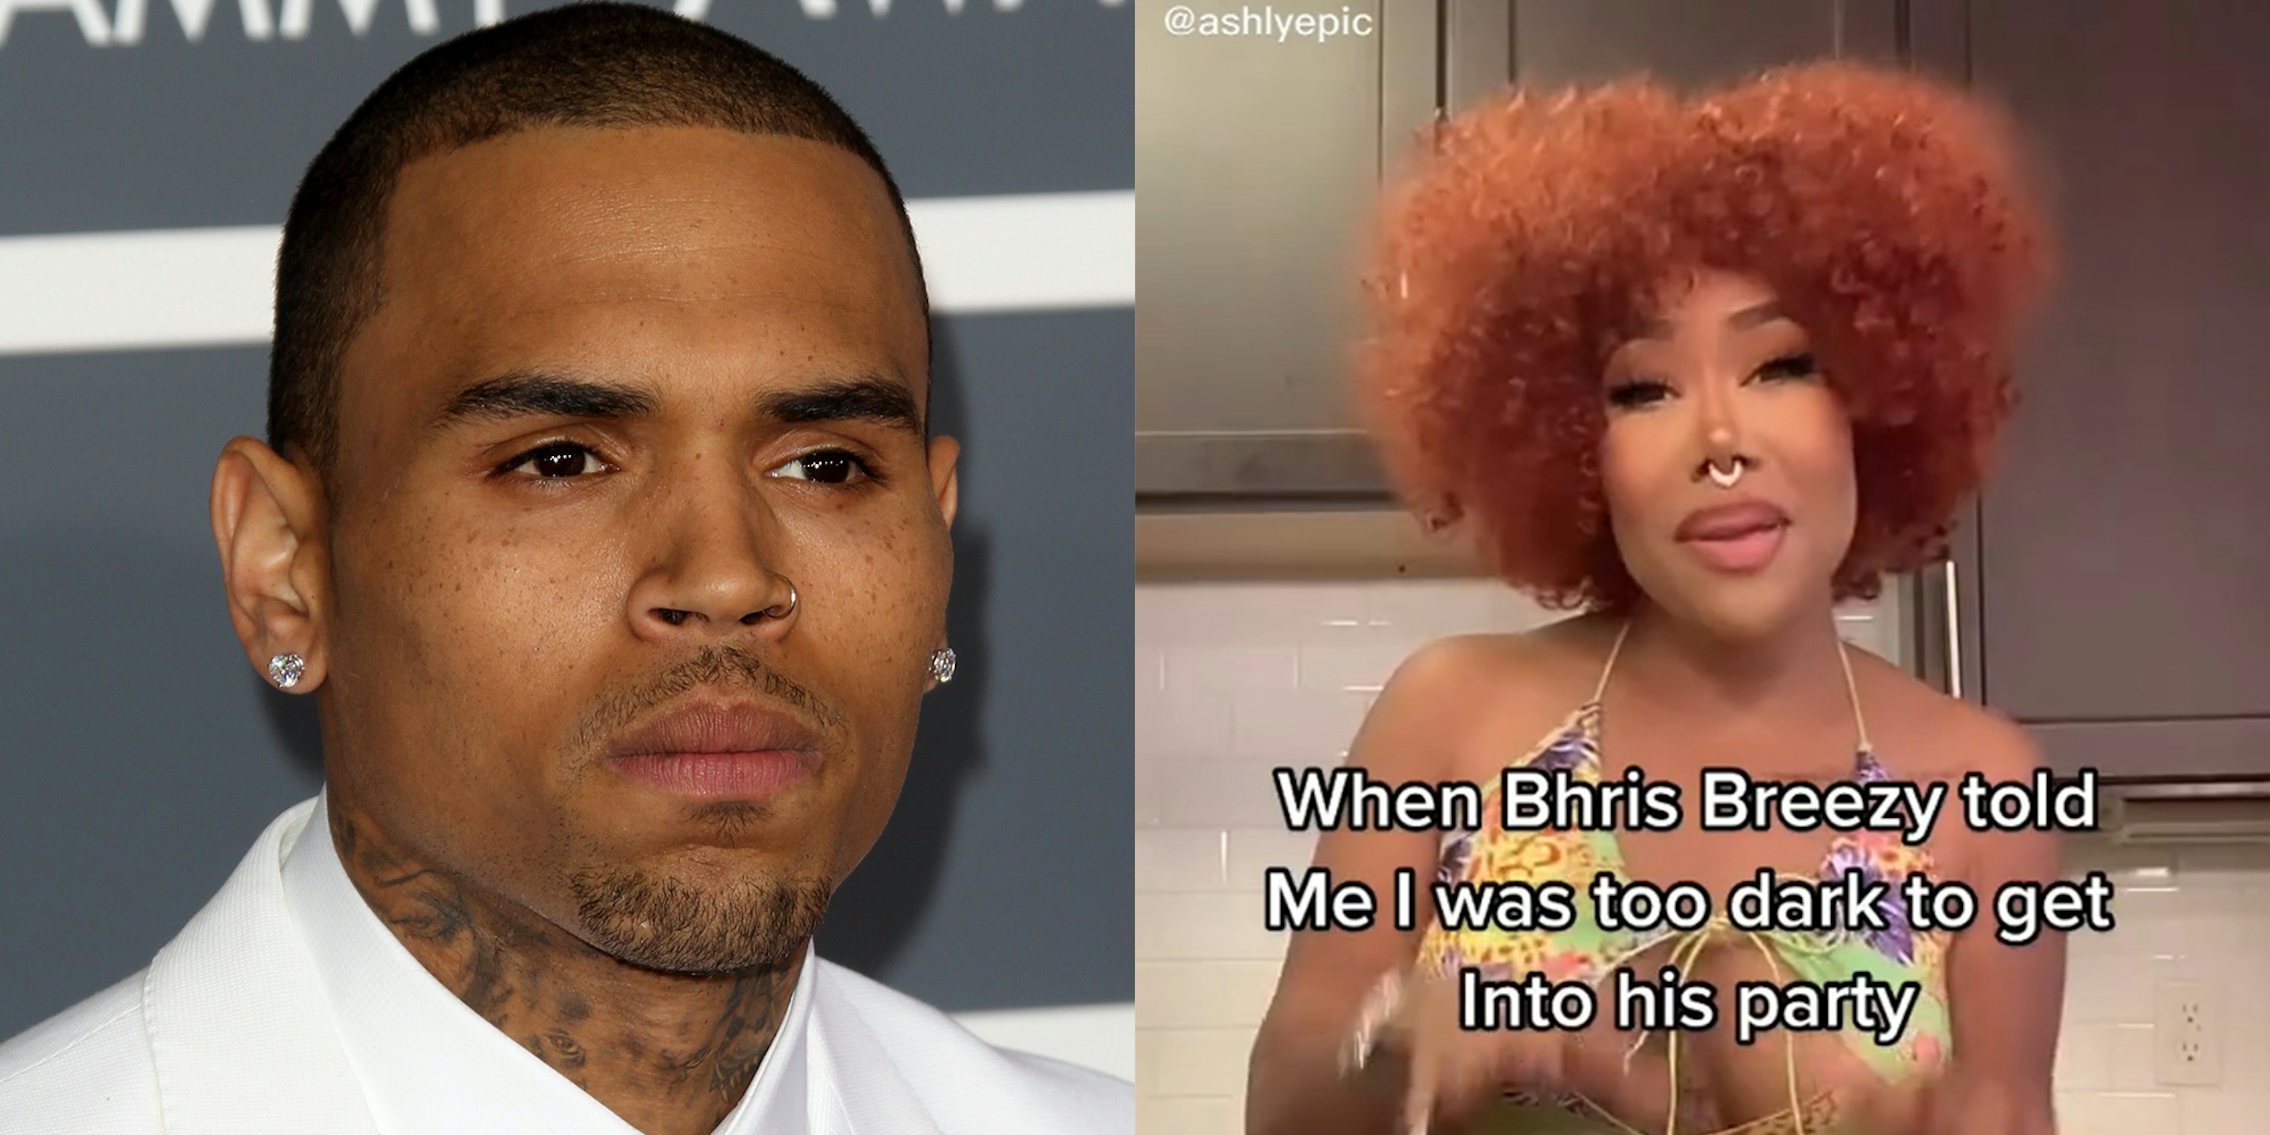 chris brown (l) young woman dancing with caption 'When Bhris Breezy told Me I was too dark to get Into his party' (r)